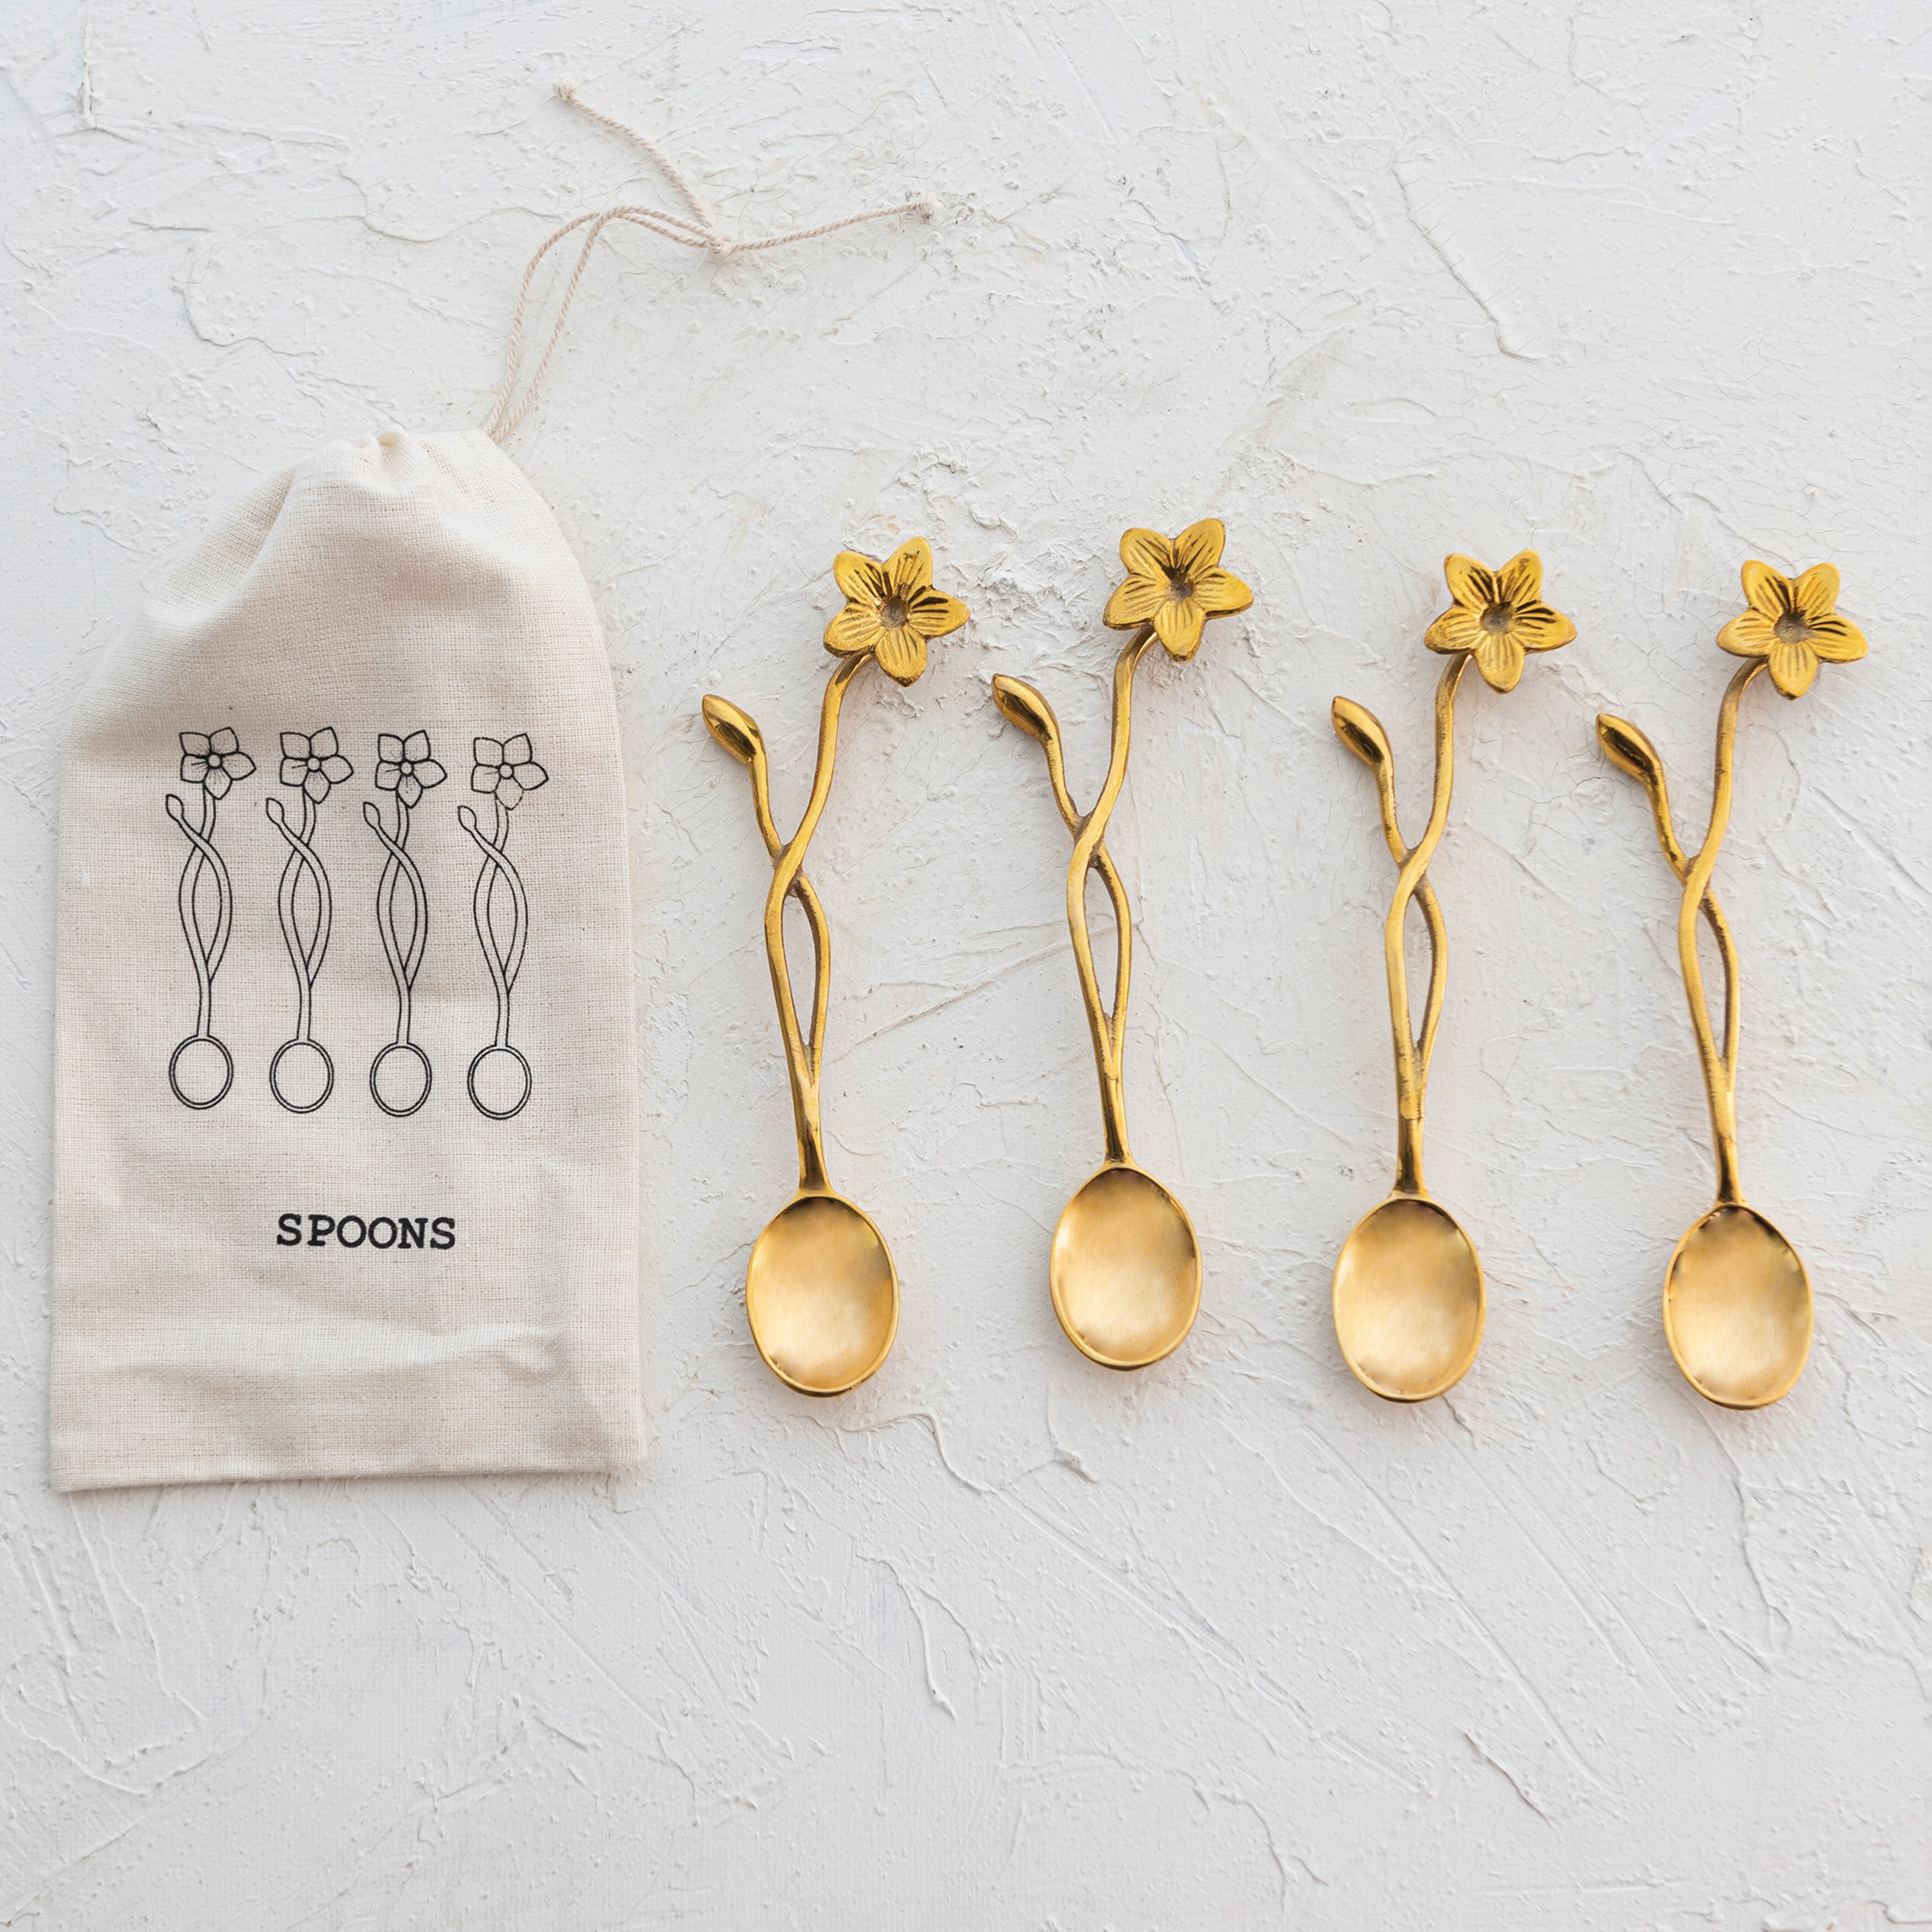 Brass Spoons with Flower Handles in Drawstring Bag - 5.5"L x 2.0"W x 0.3"H